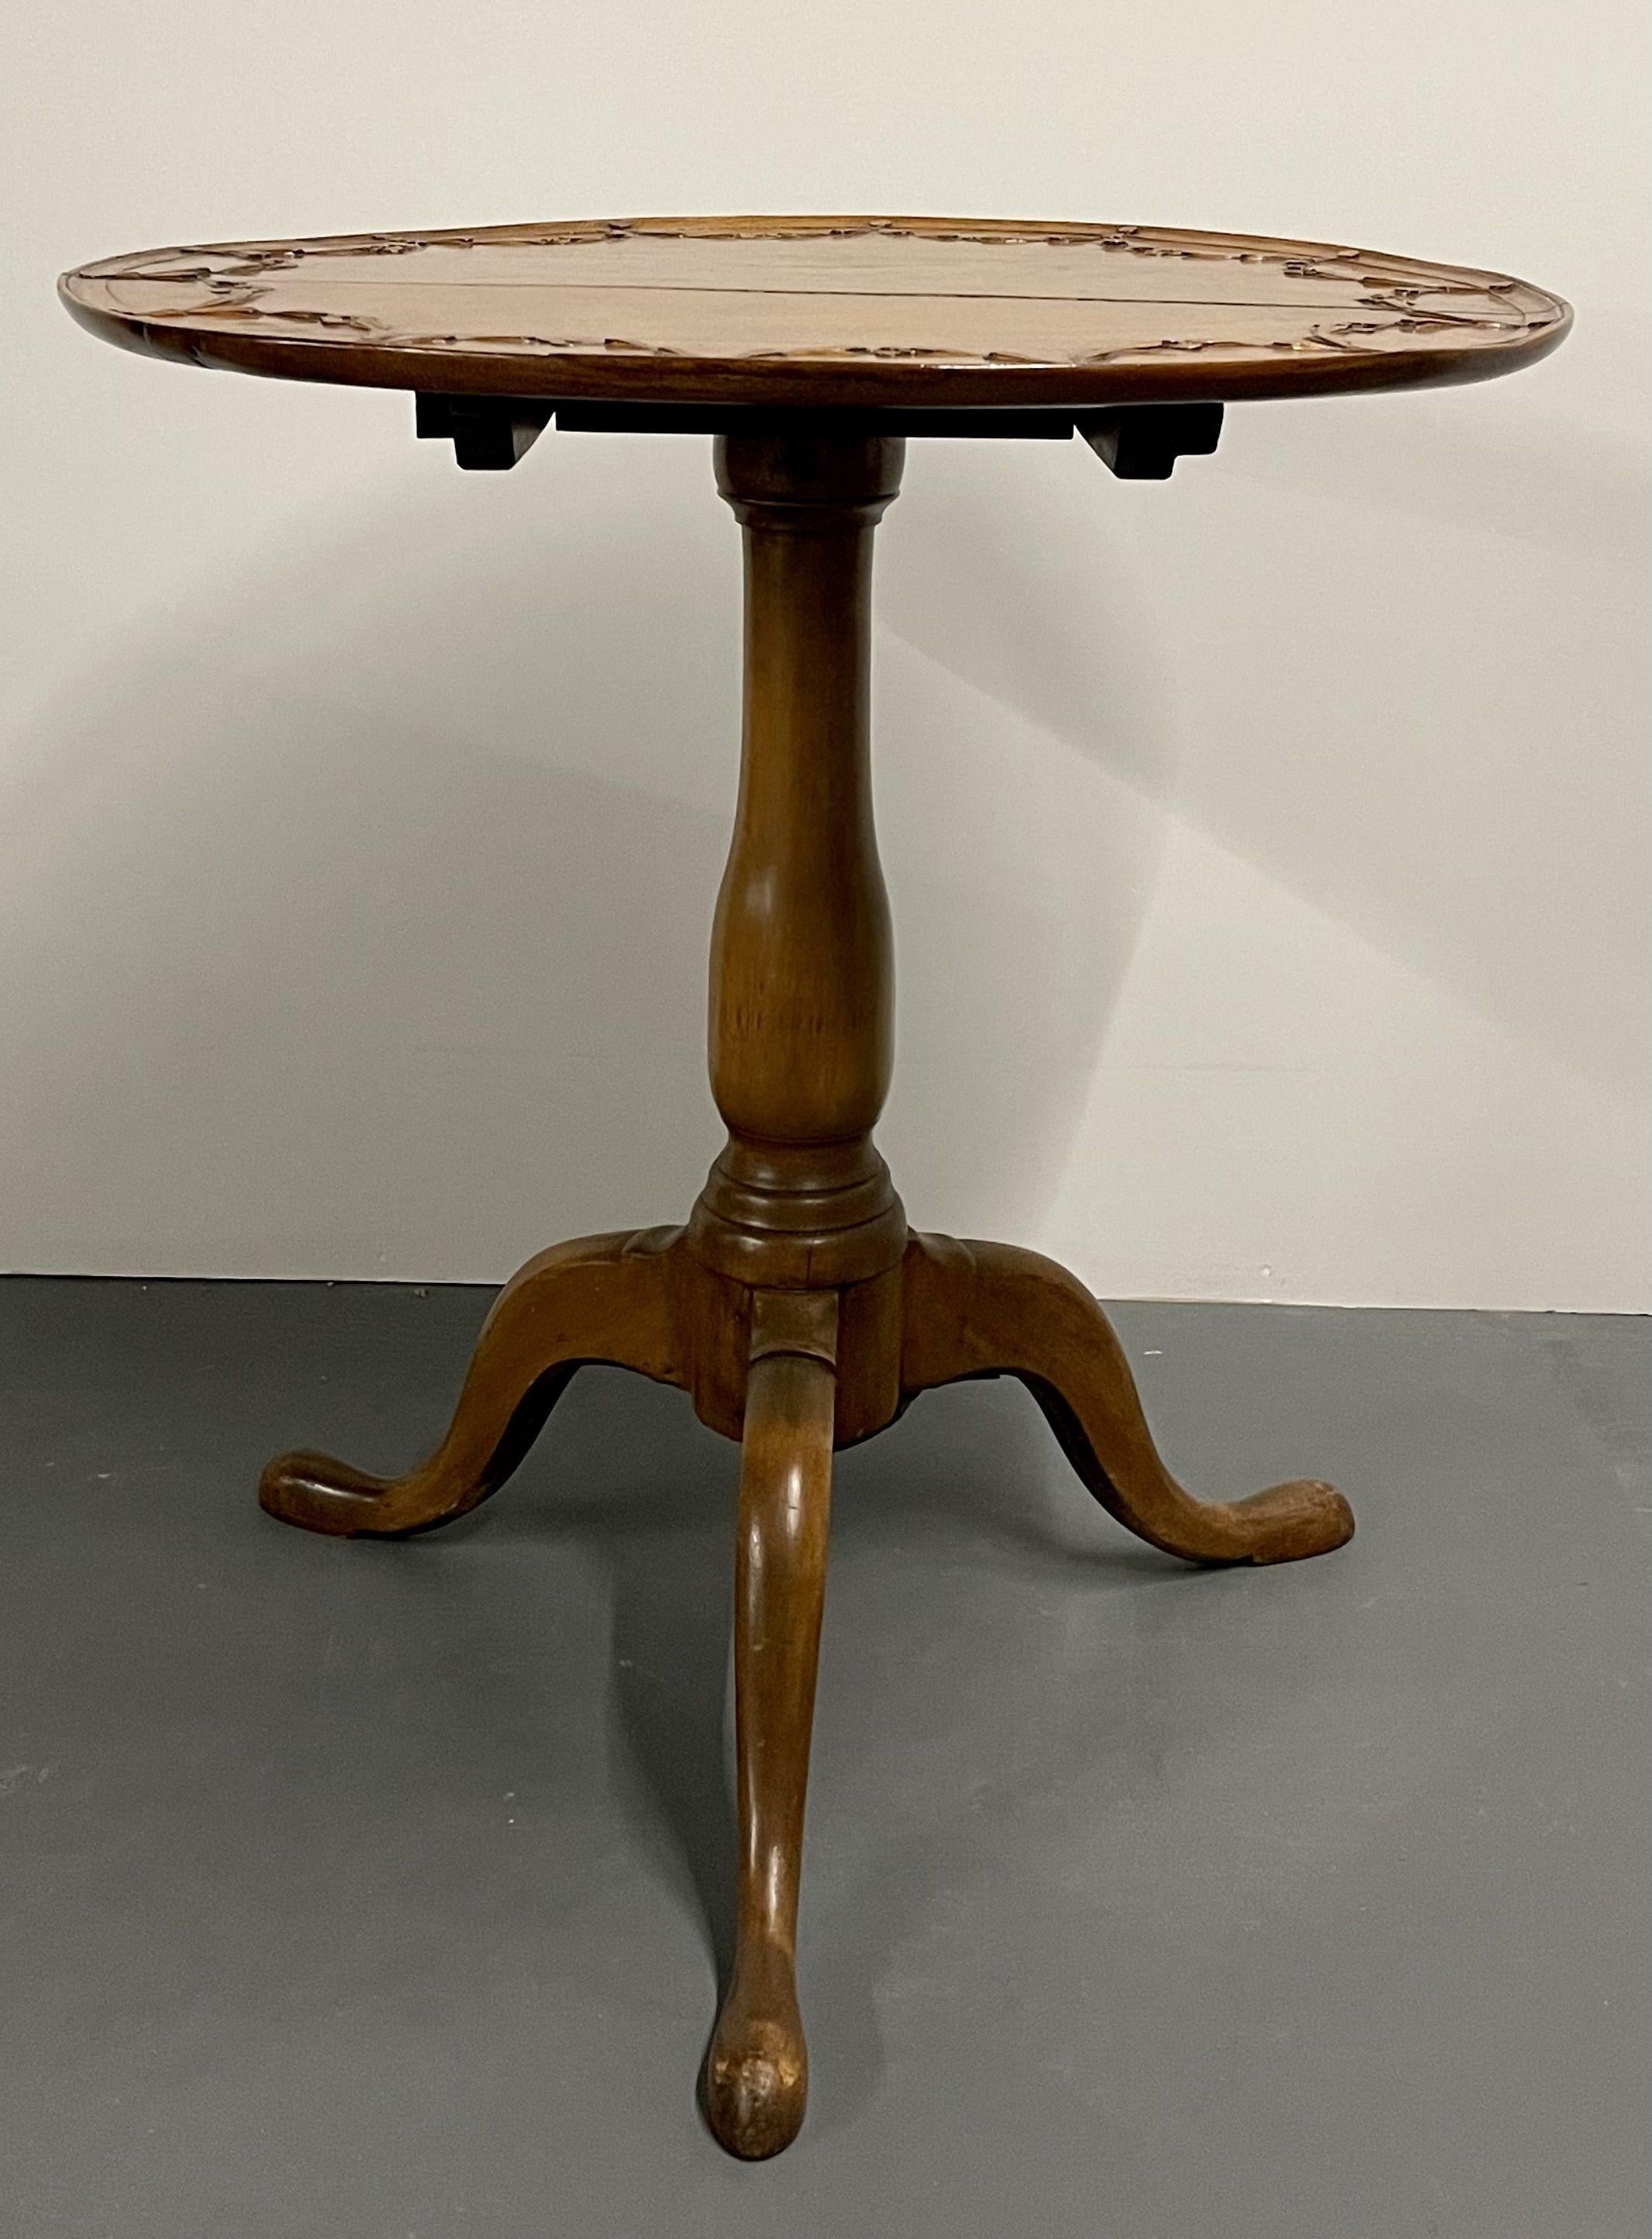 North American 19th Century American Pie Crust Table, Tilt Top, Solid Wood Carved For Sale